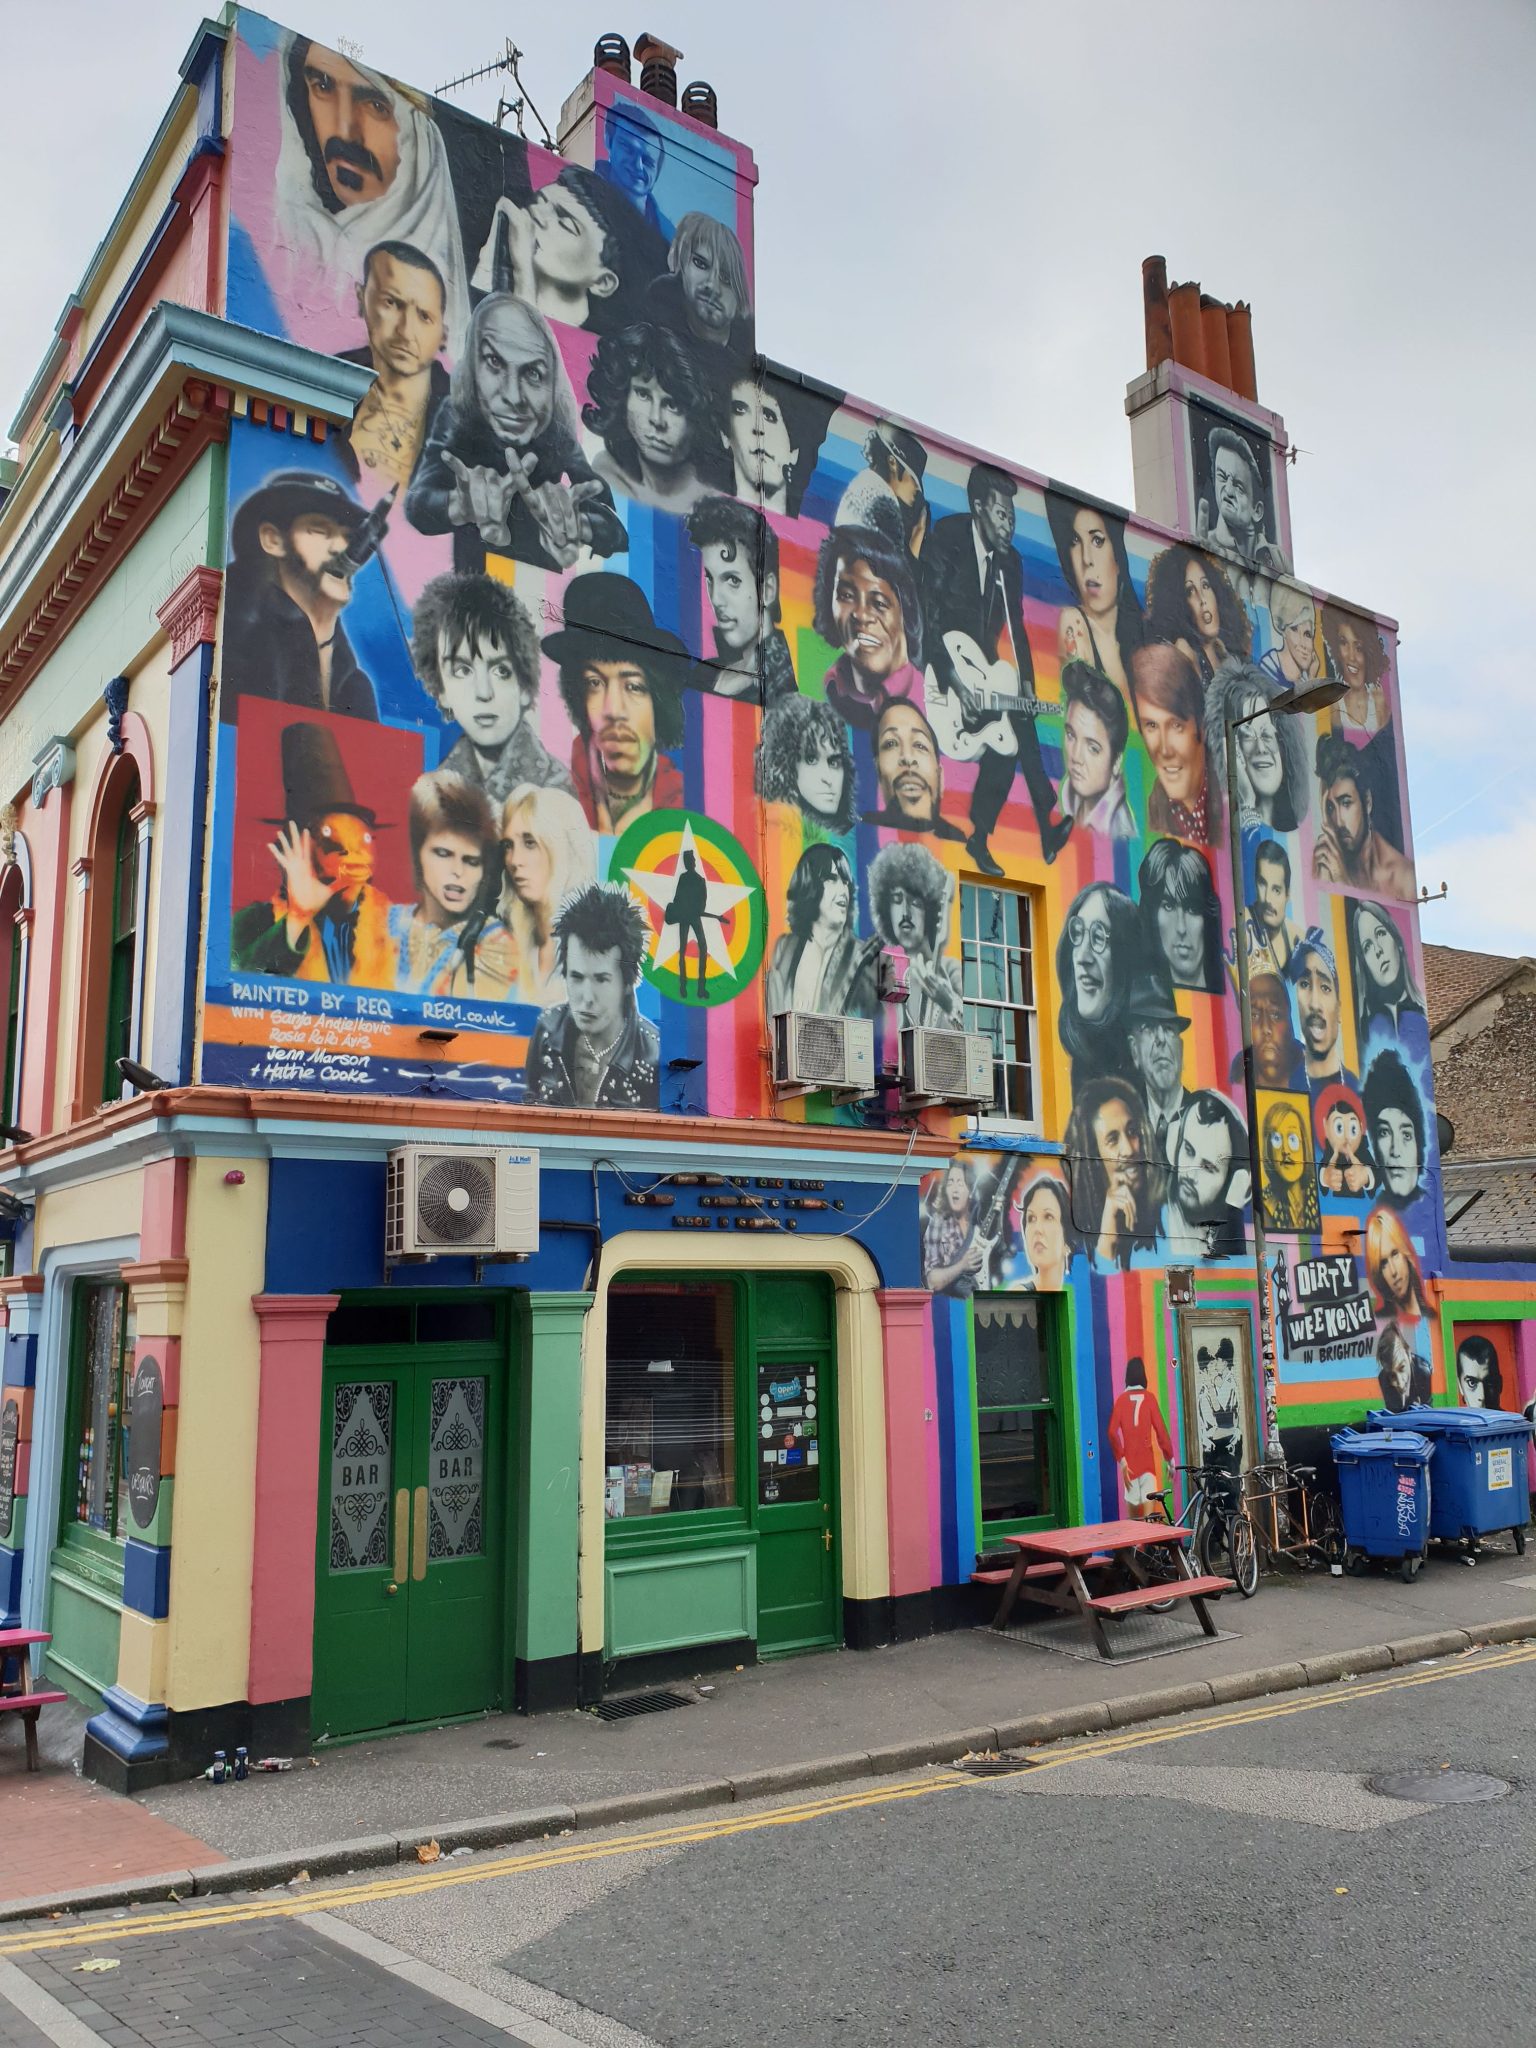 While wandering downtown Brighton for WordCamp Brighton 2018 - I photographed this house which wall has tens of paintings of famous people.